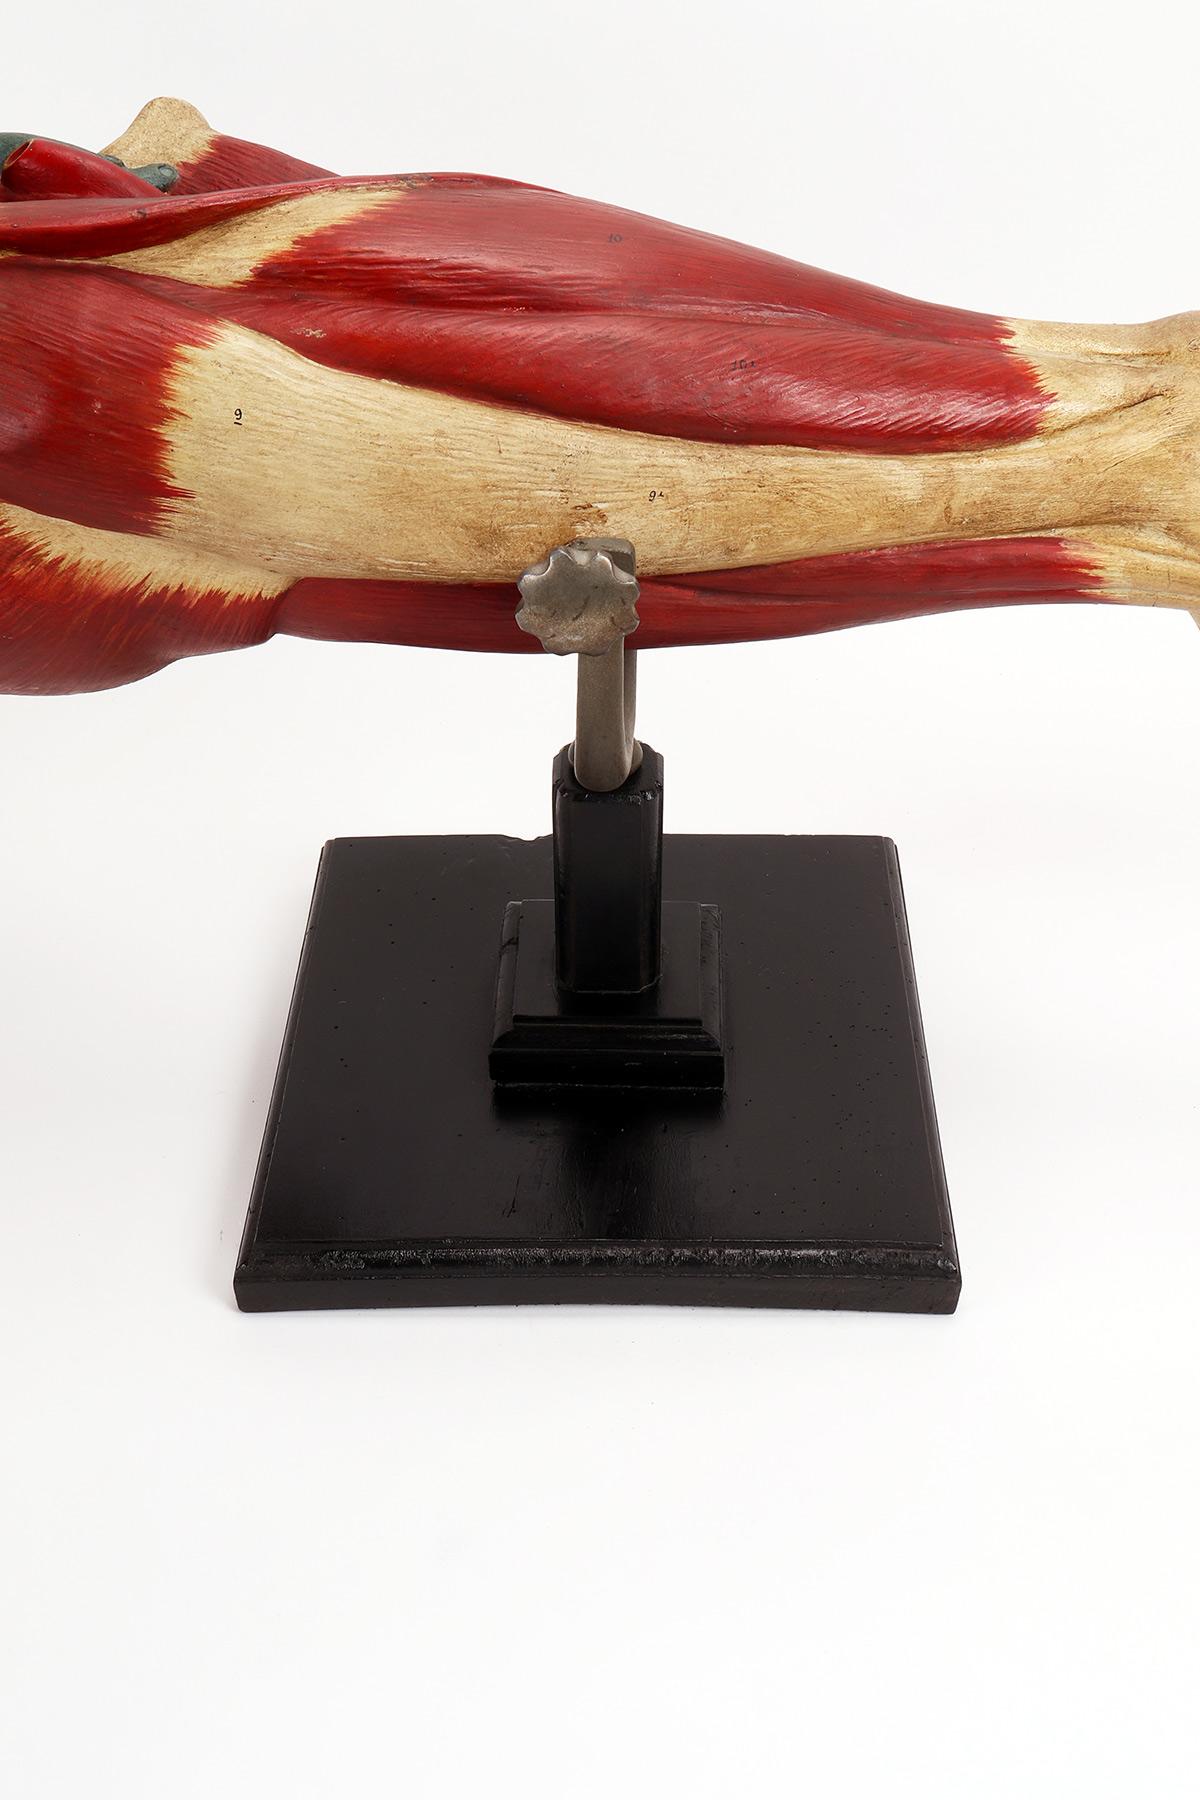 Italian Anatomical model of the lower limb, Italy 1900. For Sale